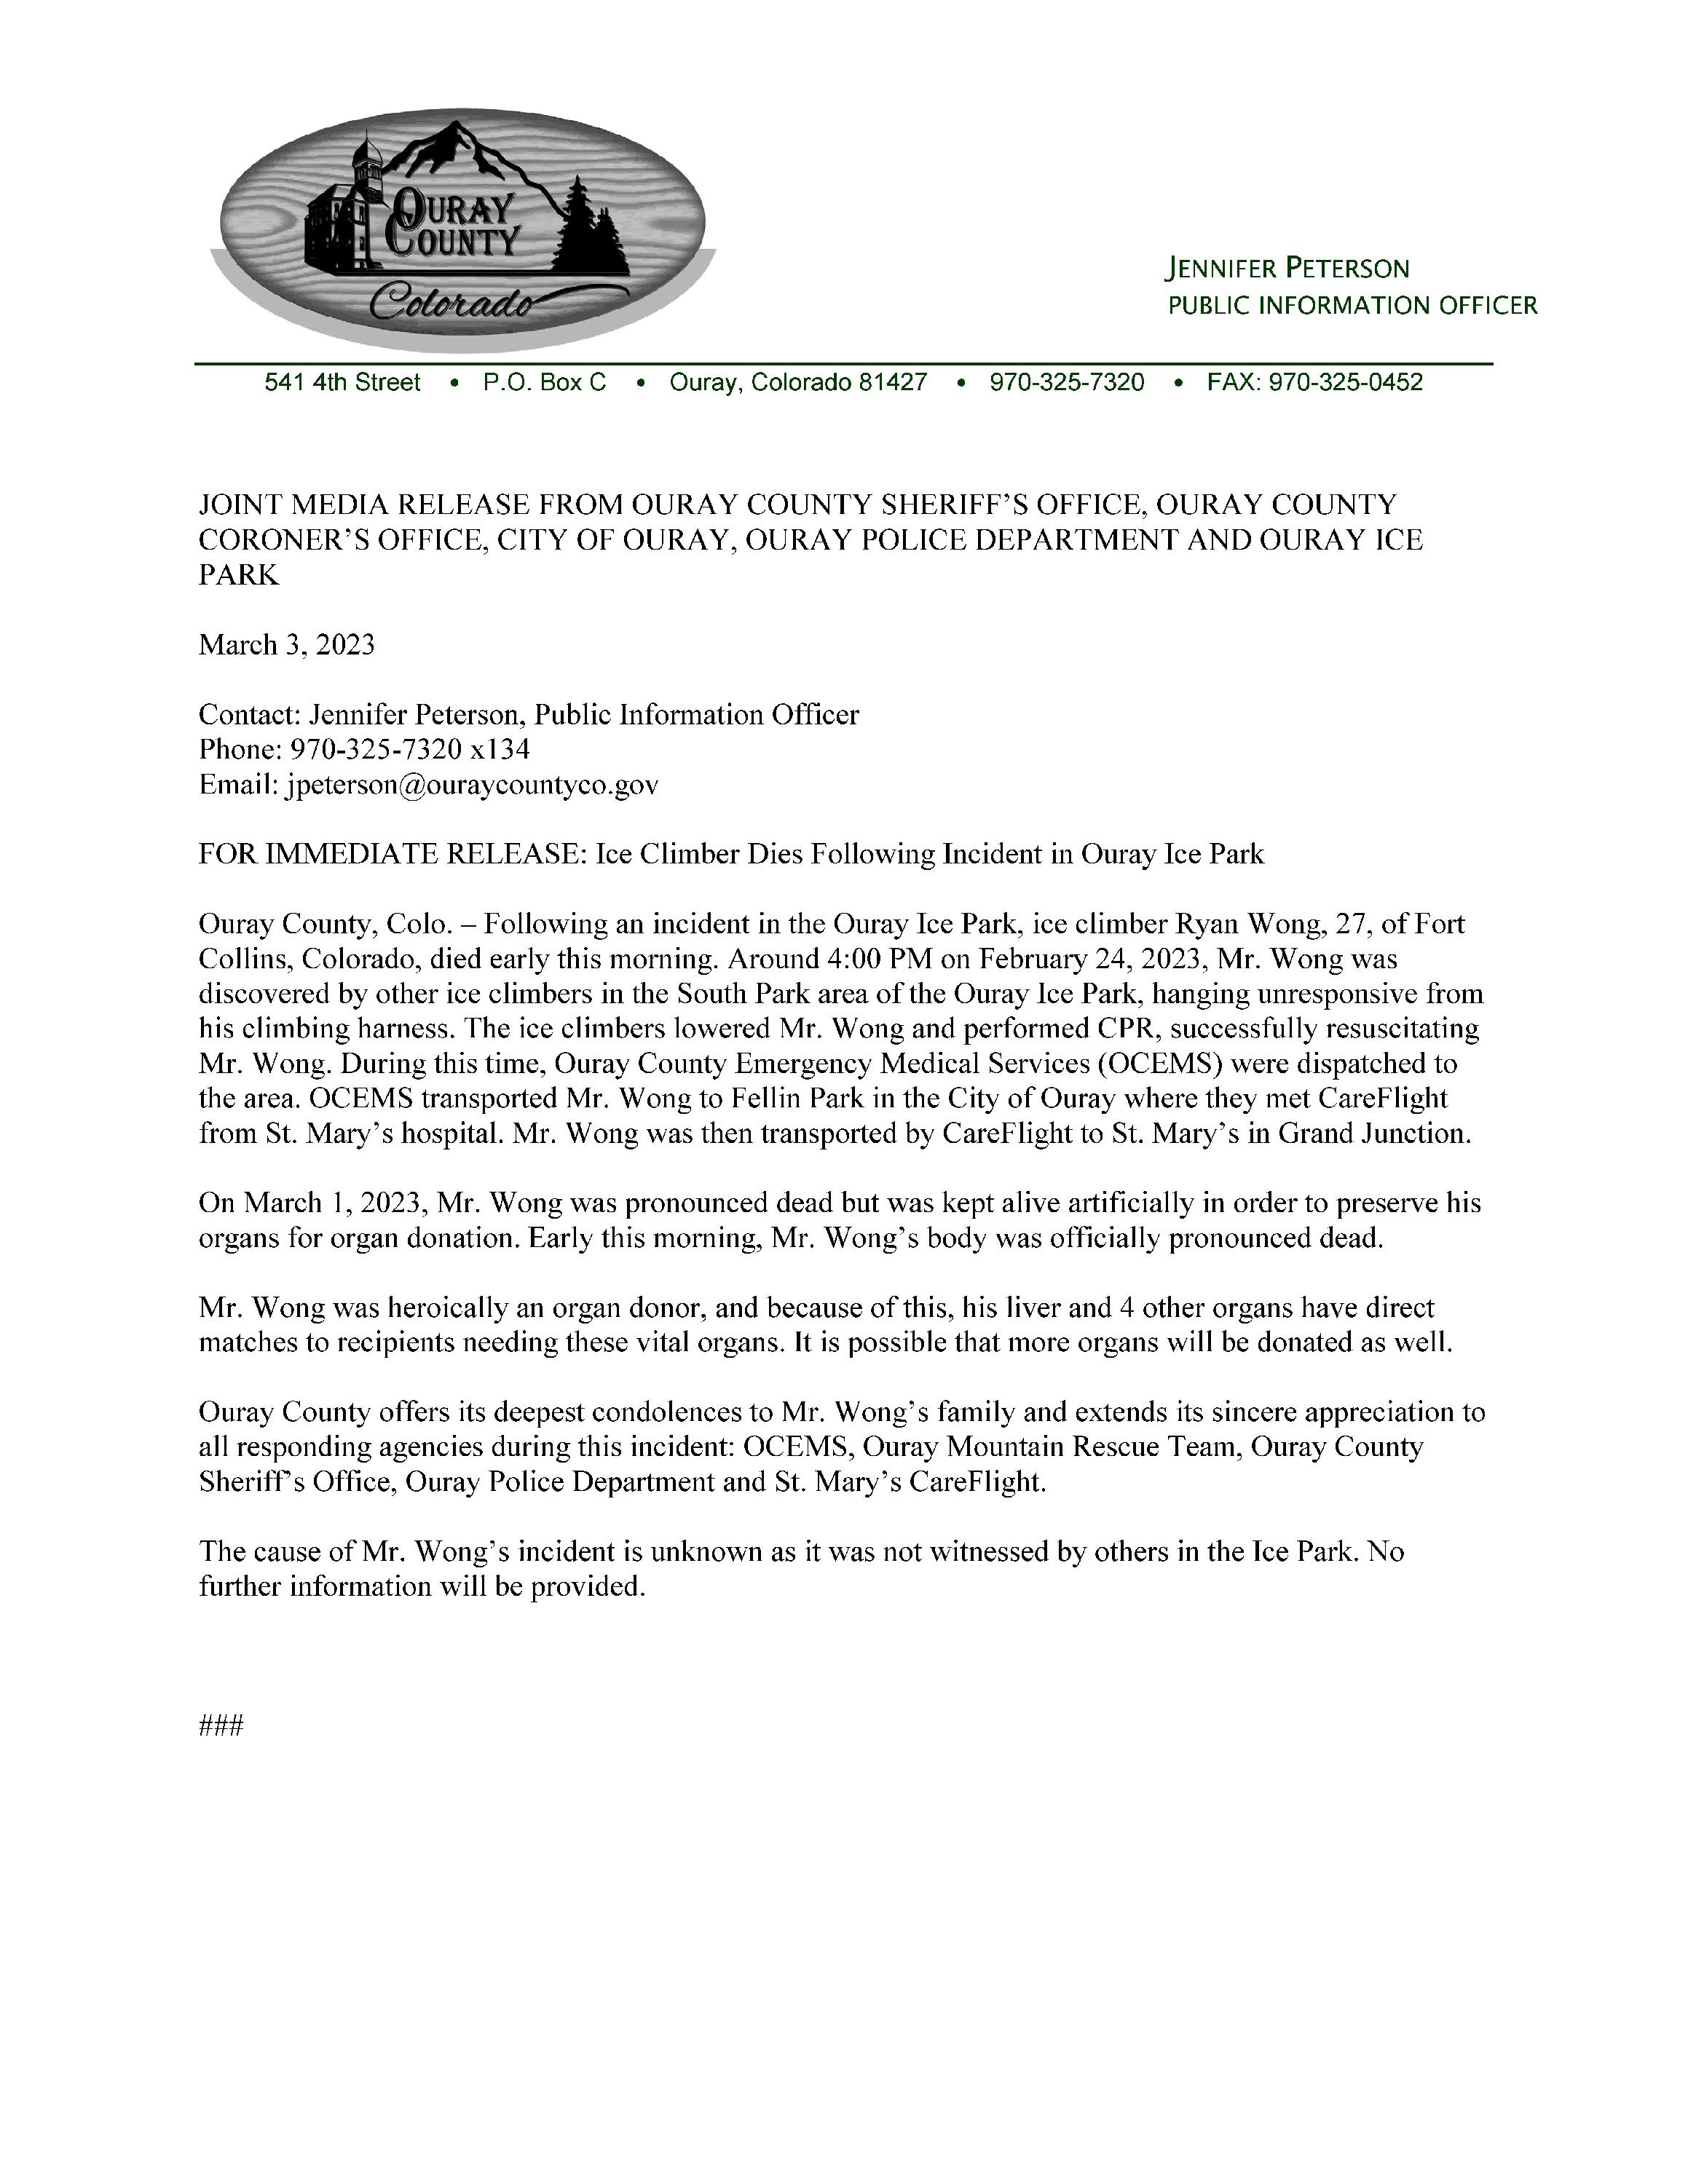 Press Release - Ryan Wong Death 3.3.23 Joint Release